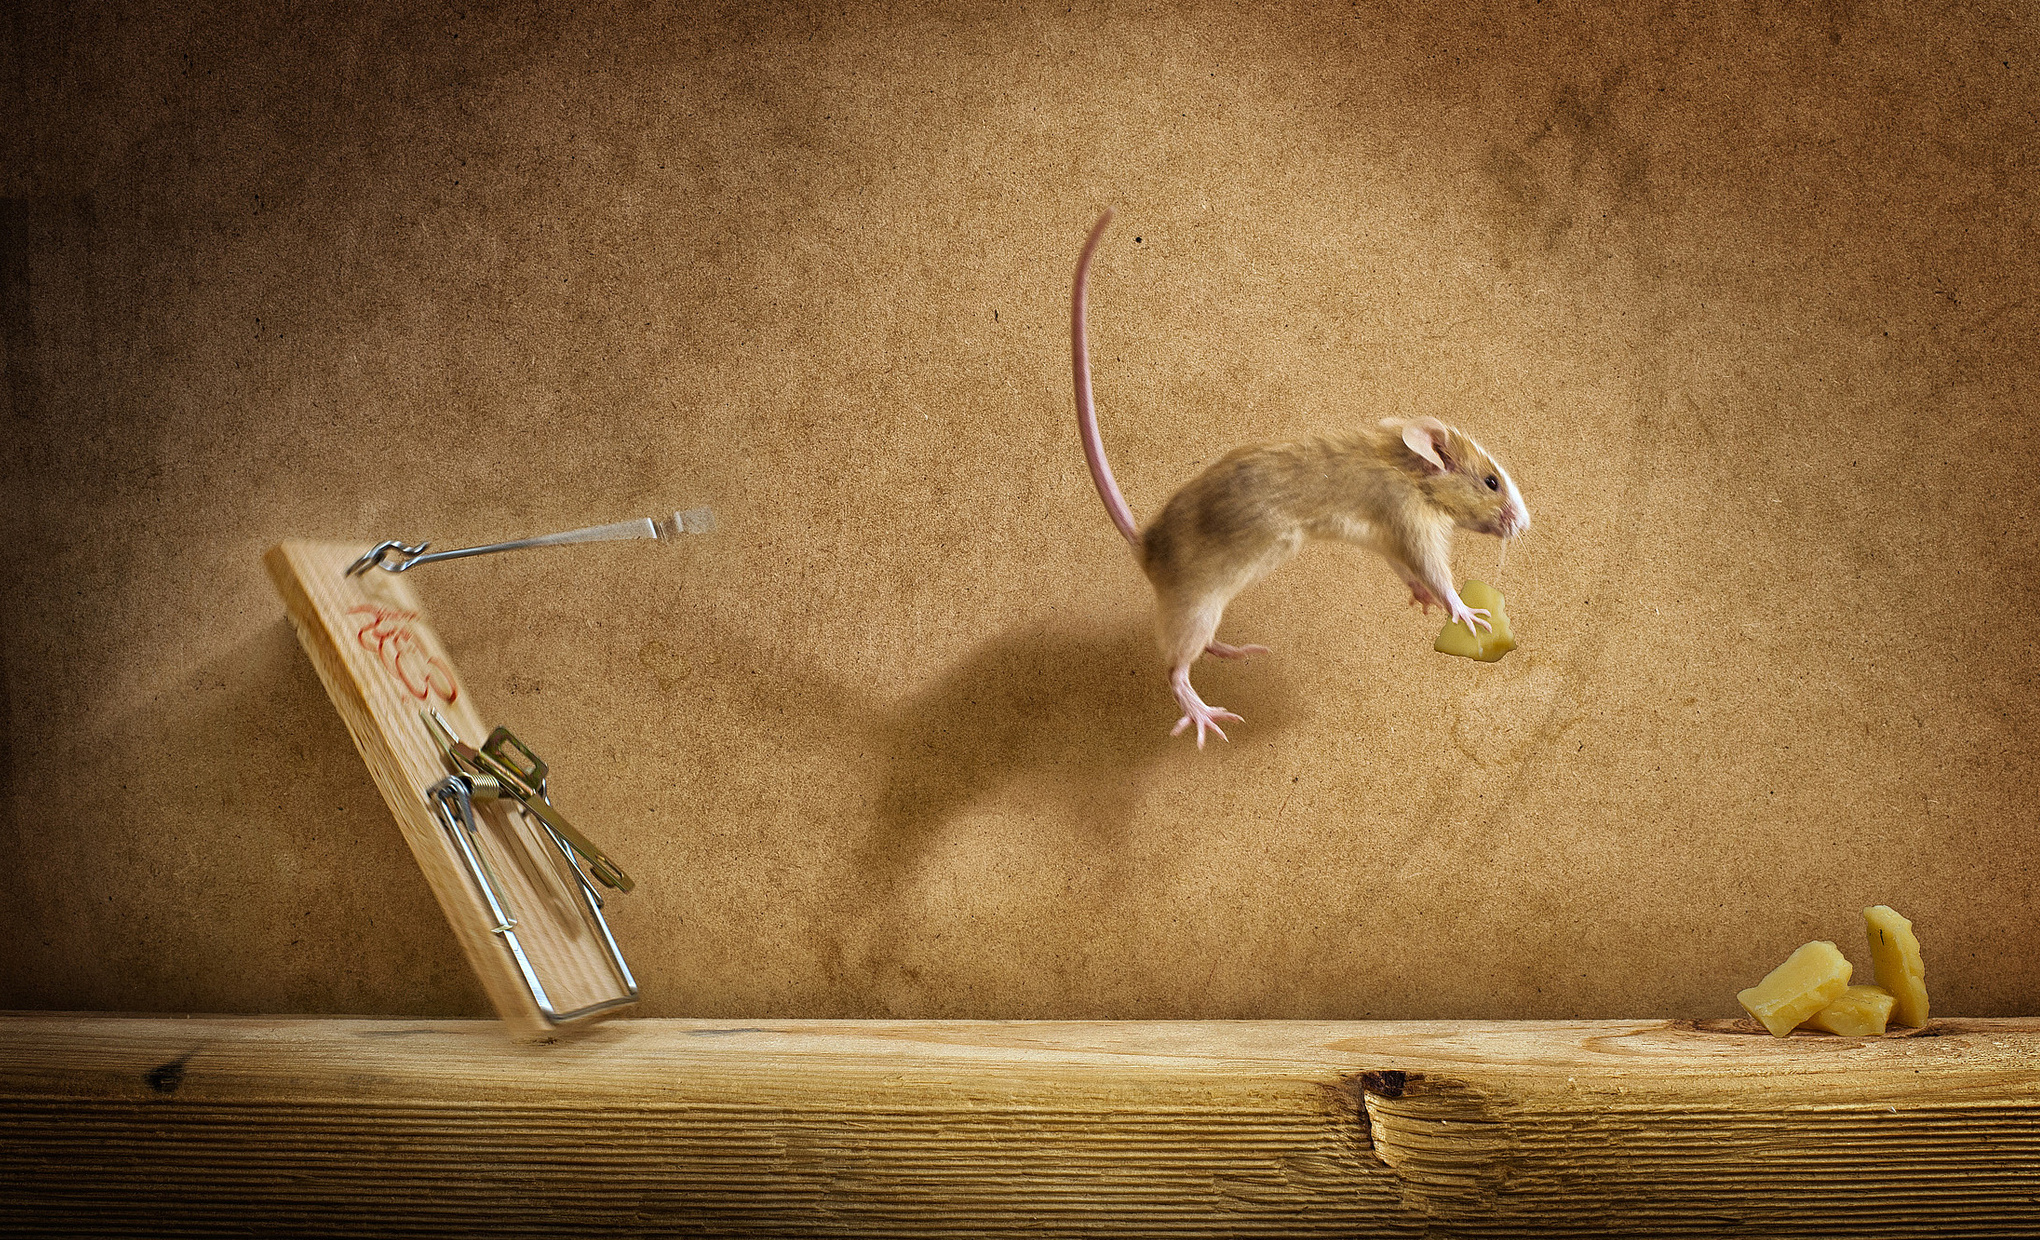 mousetrap, Mish, Flight, Cheese, Mouse Wallpaper